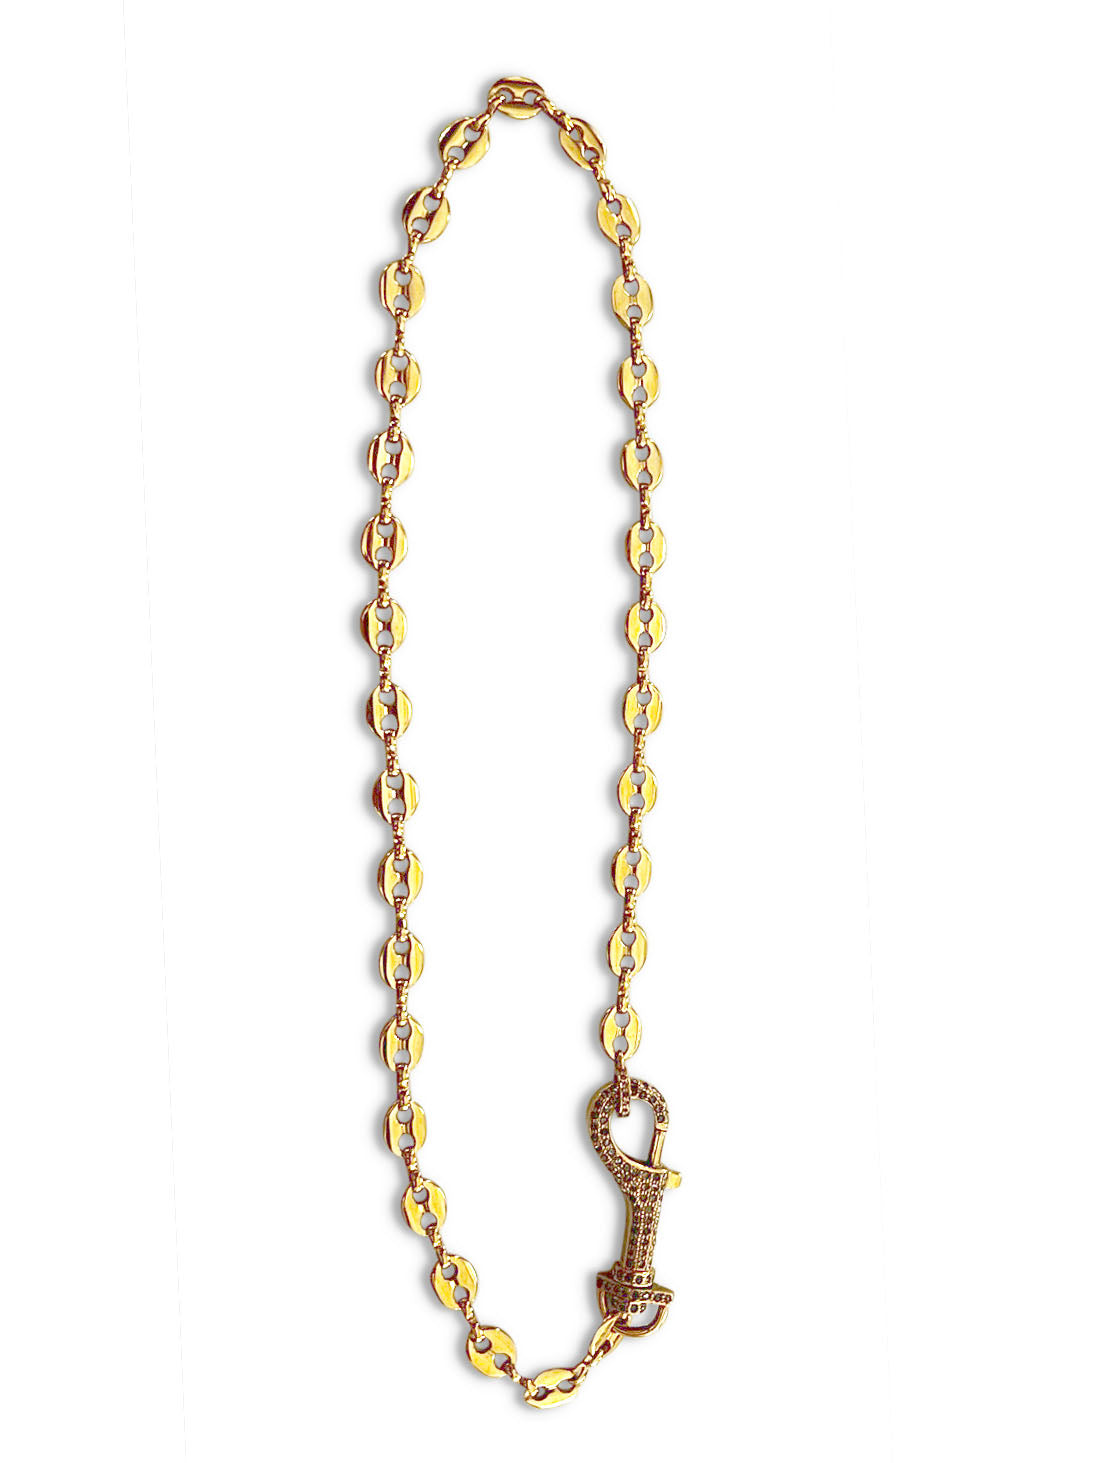 22kt Gold over Brass Chain with Pave Diamond Clasp